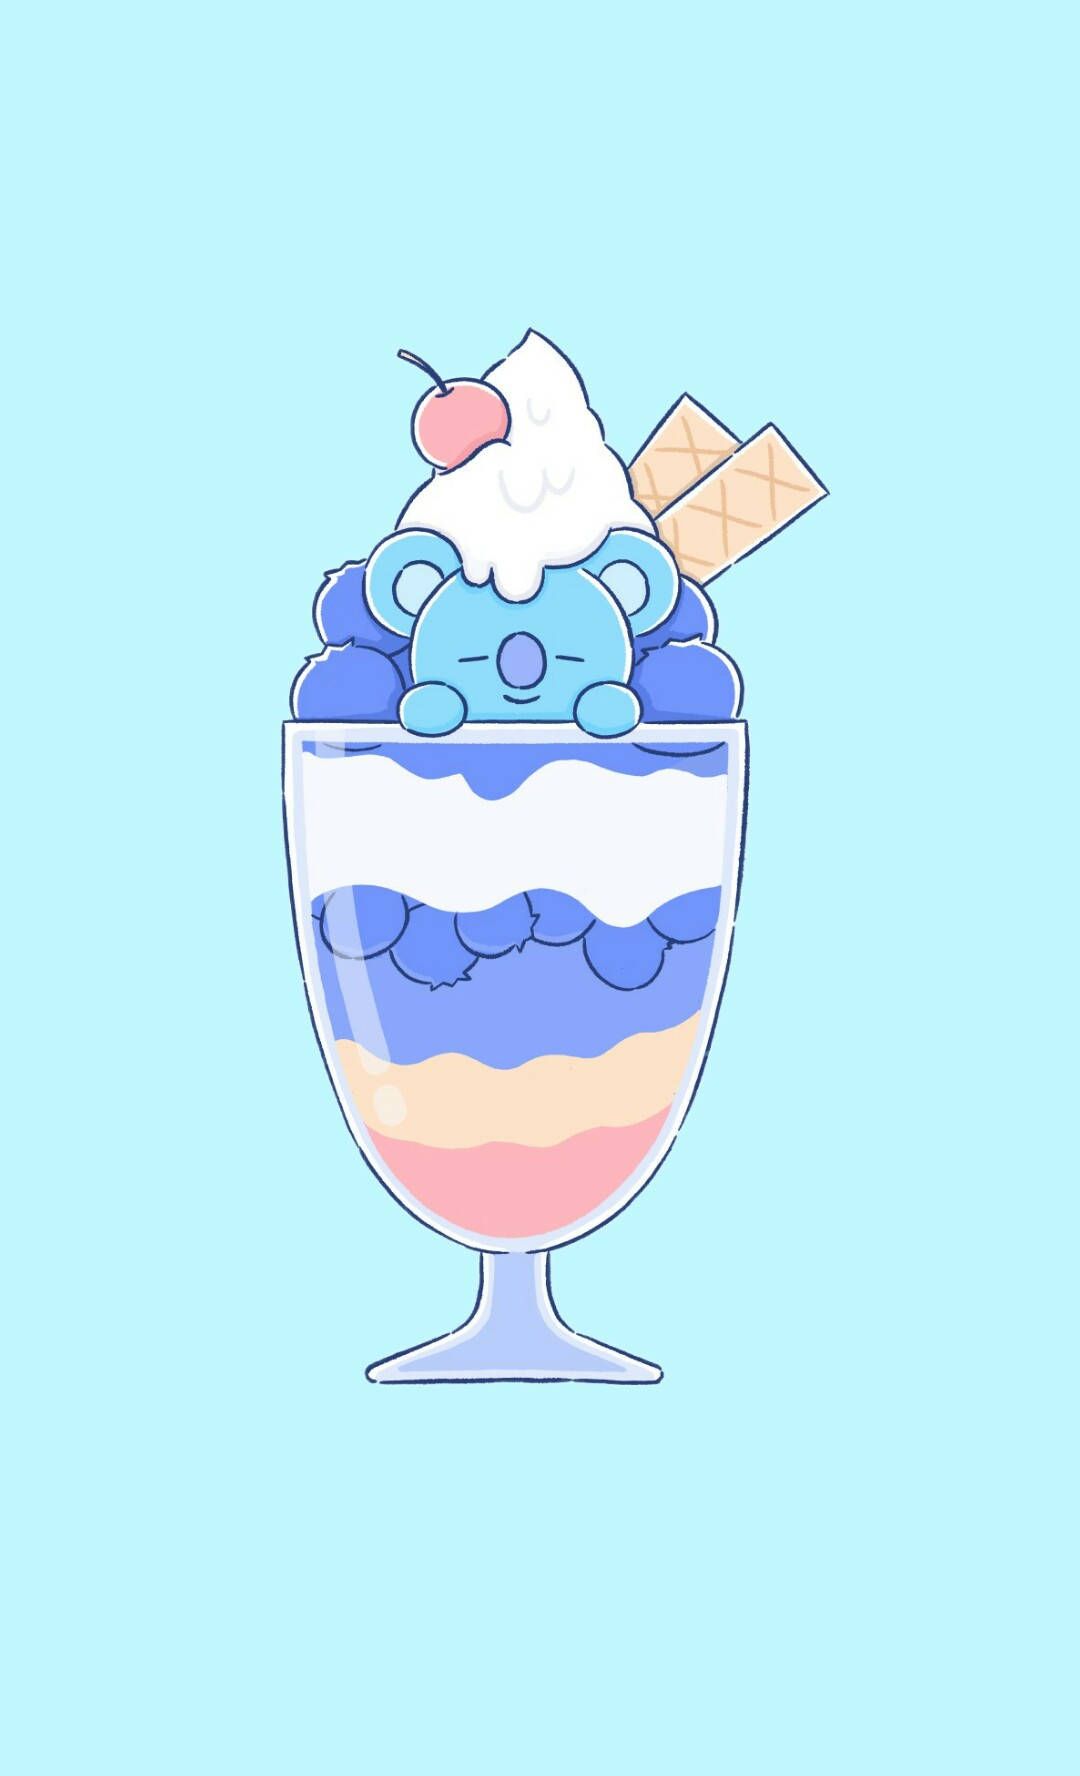 IPhone wallpaper of a blue ice cream sundae with a blue cat as the cherry on top - Ice cream